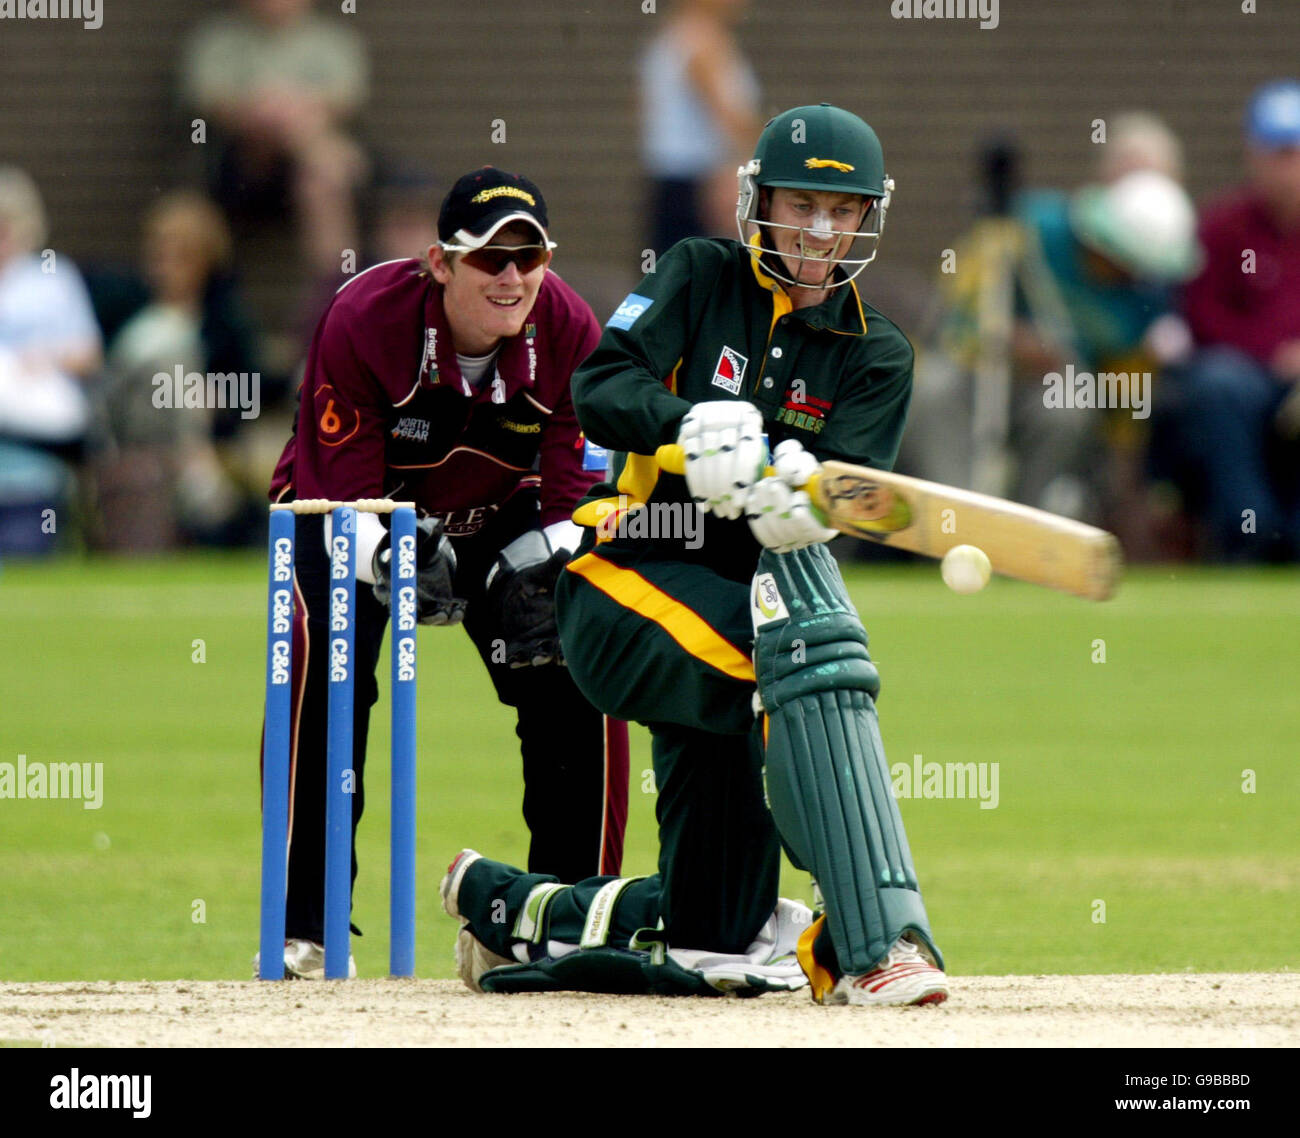 Leicestershire's Thomas New had an innings of 68 against Northamptonshire. Matthewus Wessels keeps wicket. Stock Photo